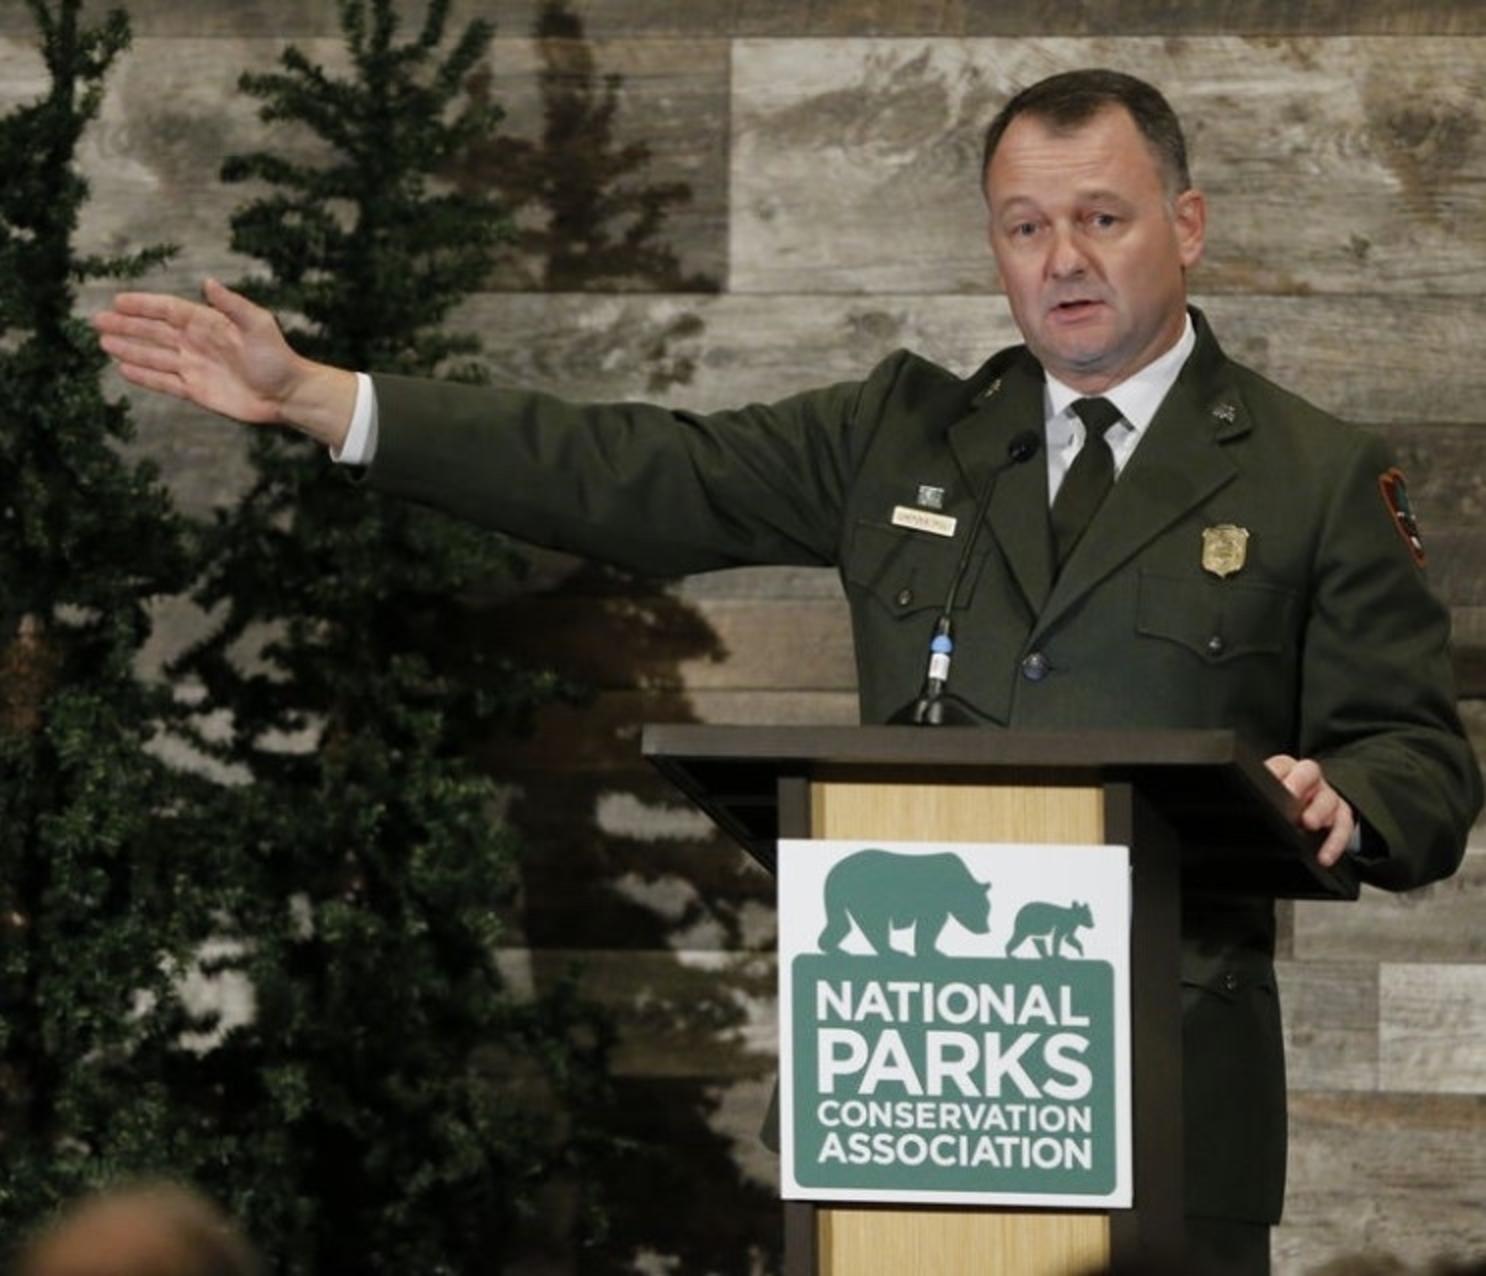 Cameron Sholly talks about leadership at the National Park Service before a gathering sponsored by the National Parks Conservation Association. Photo courtesy Eric MIller